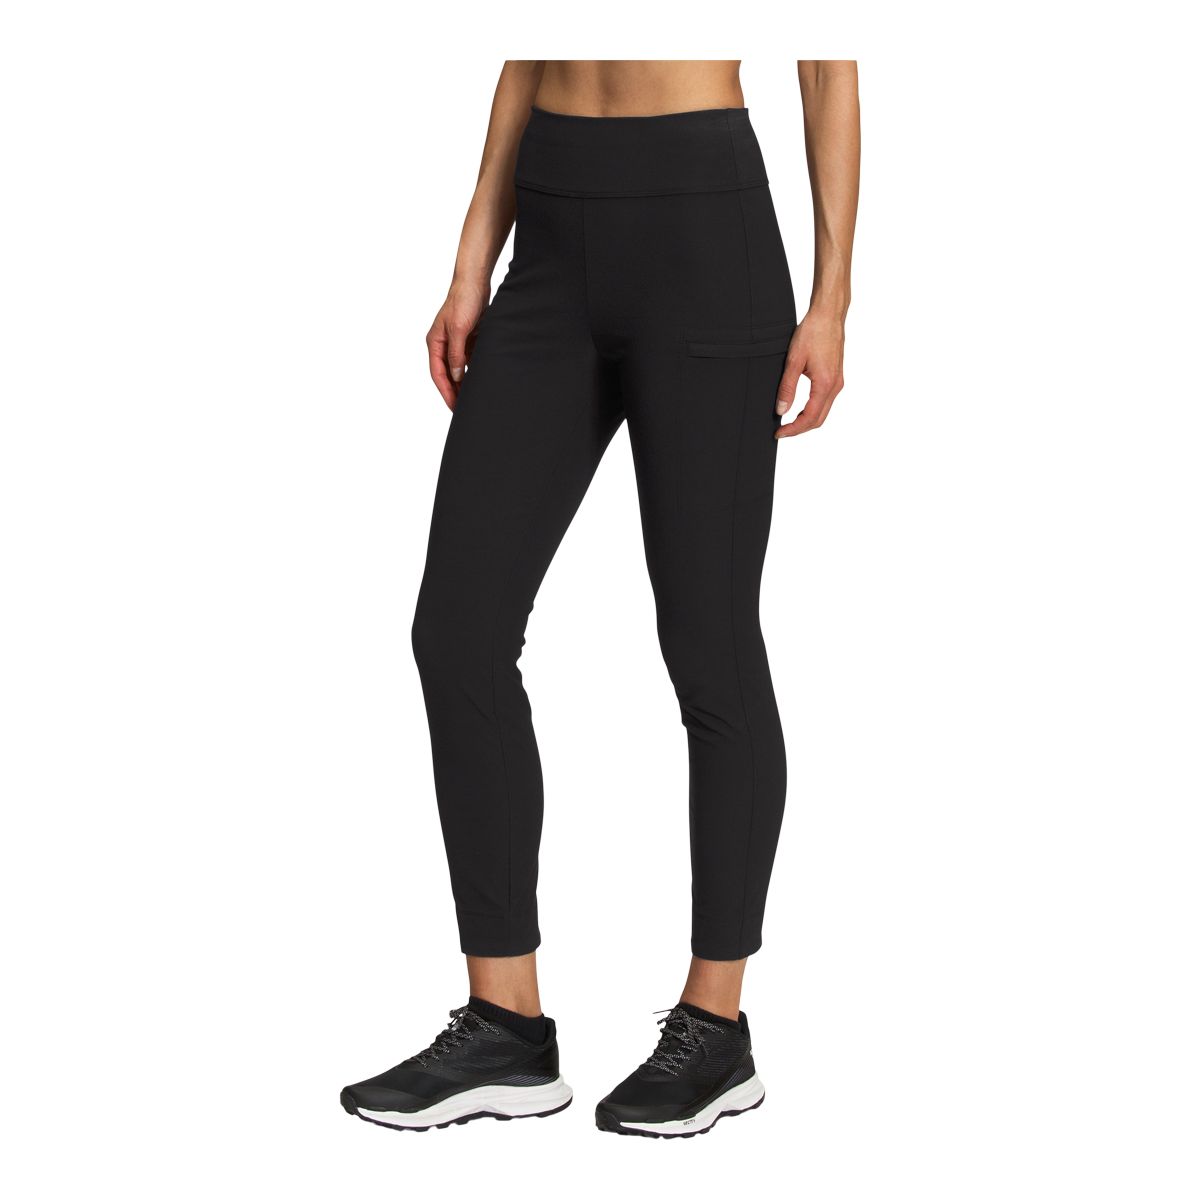 The North Face Black Leggings Size L - 65% off